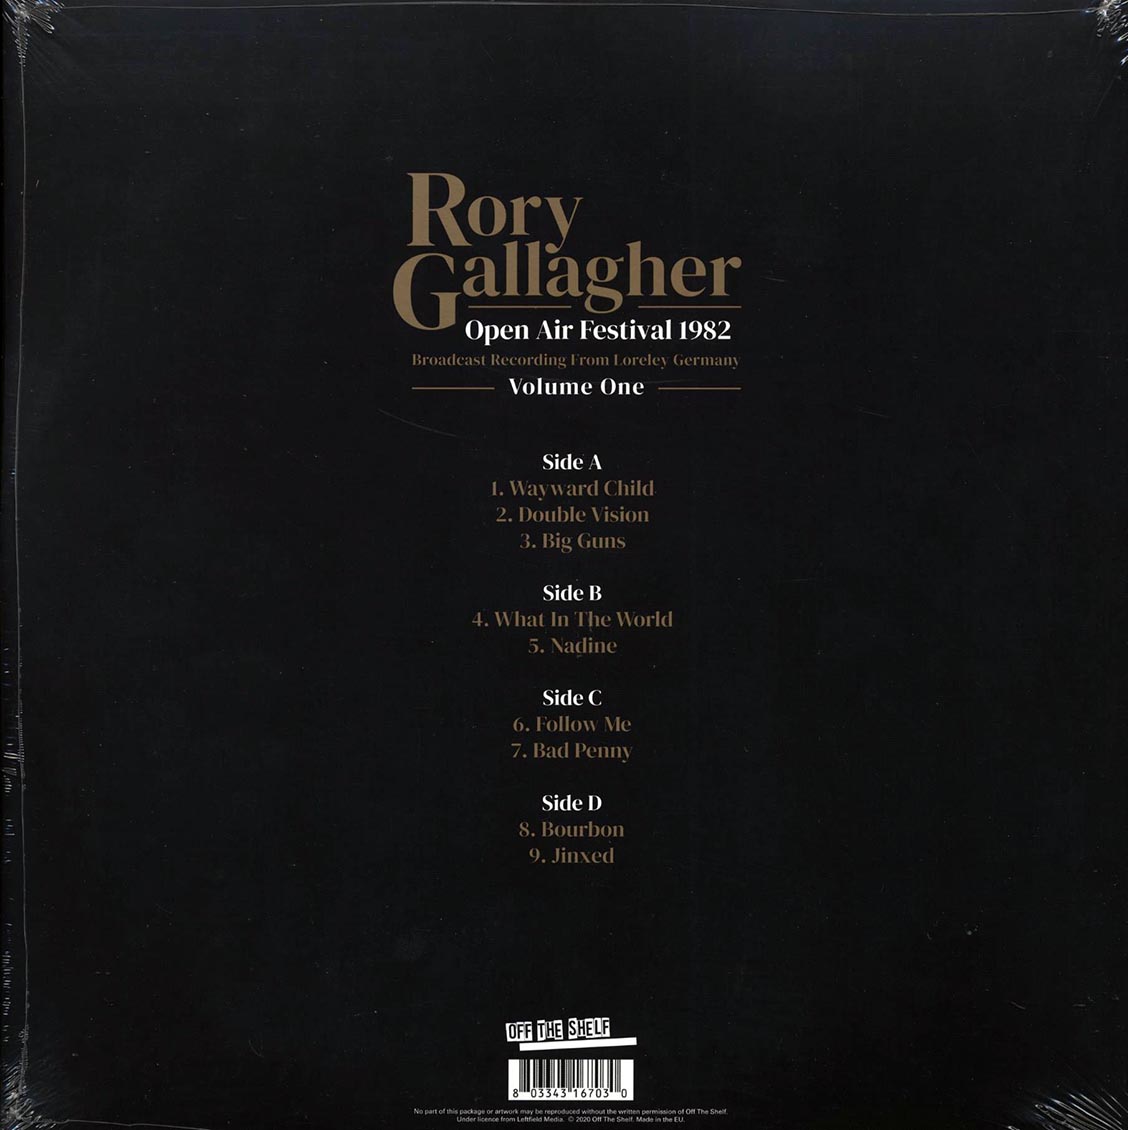 Rory Gallagher - Open Air Festival 1982 Volume 1: Broadcast Recording From Loreley Germany